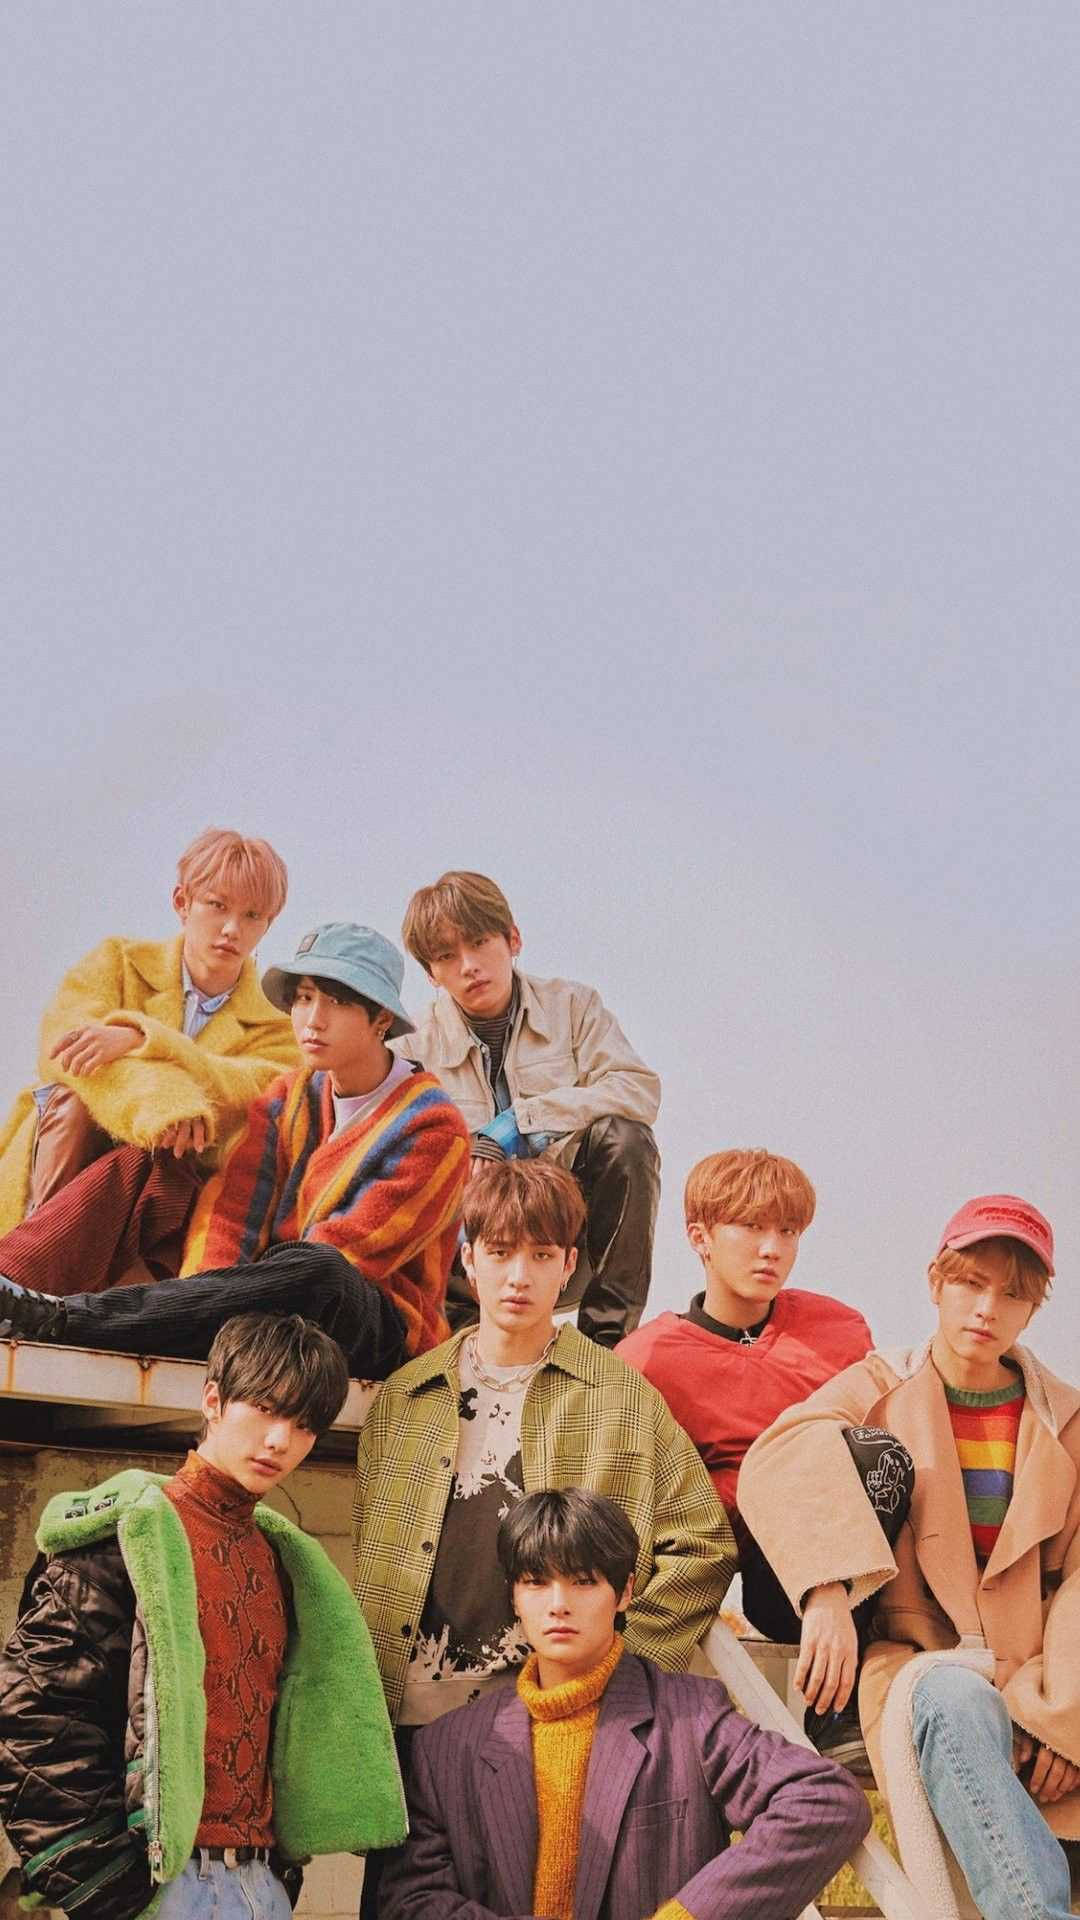 Stray Kids Aesthetic Wallpapers